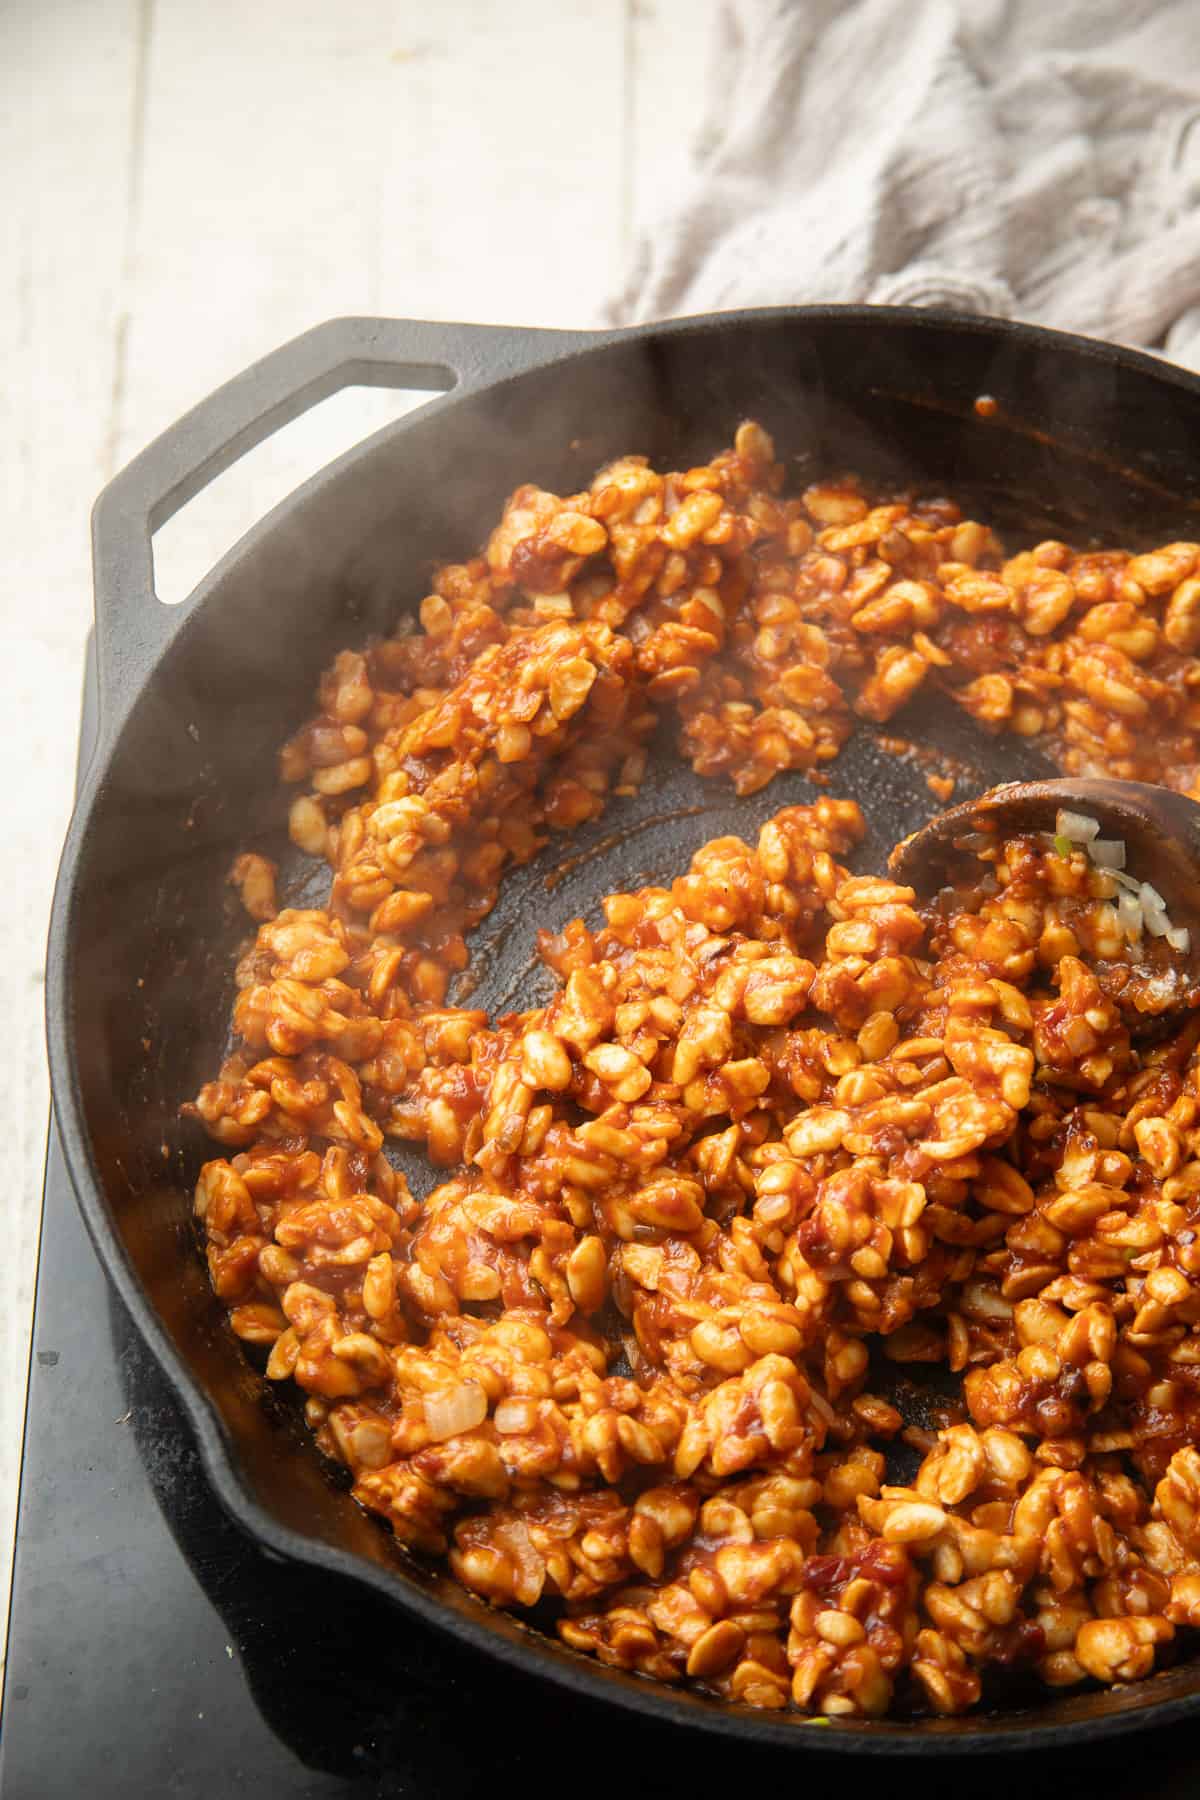 Tempeh Taco filling cooking in a skillet with wooden spoon.